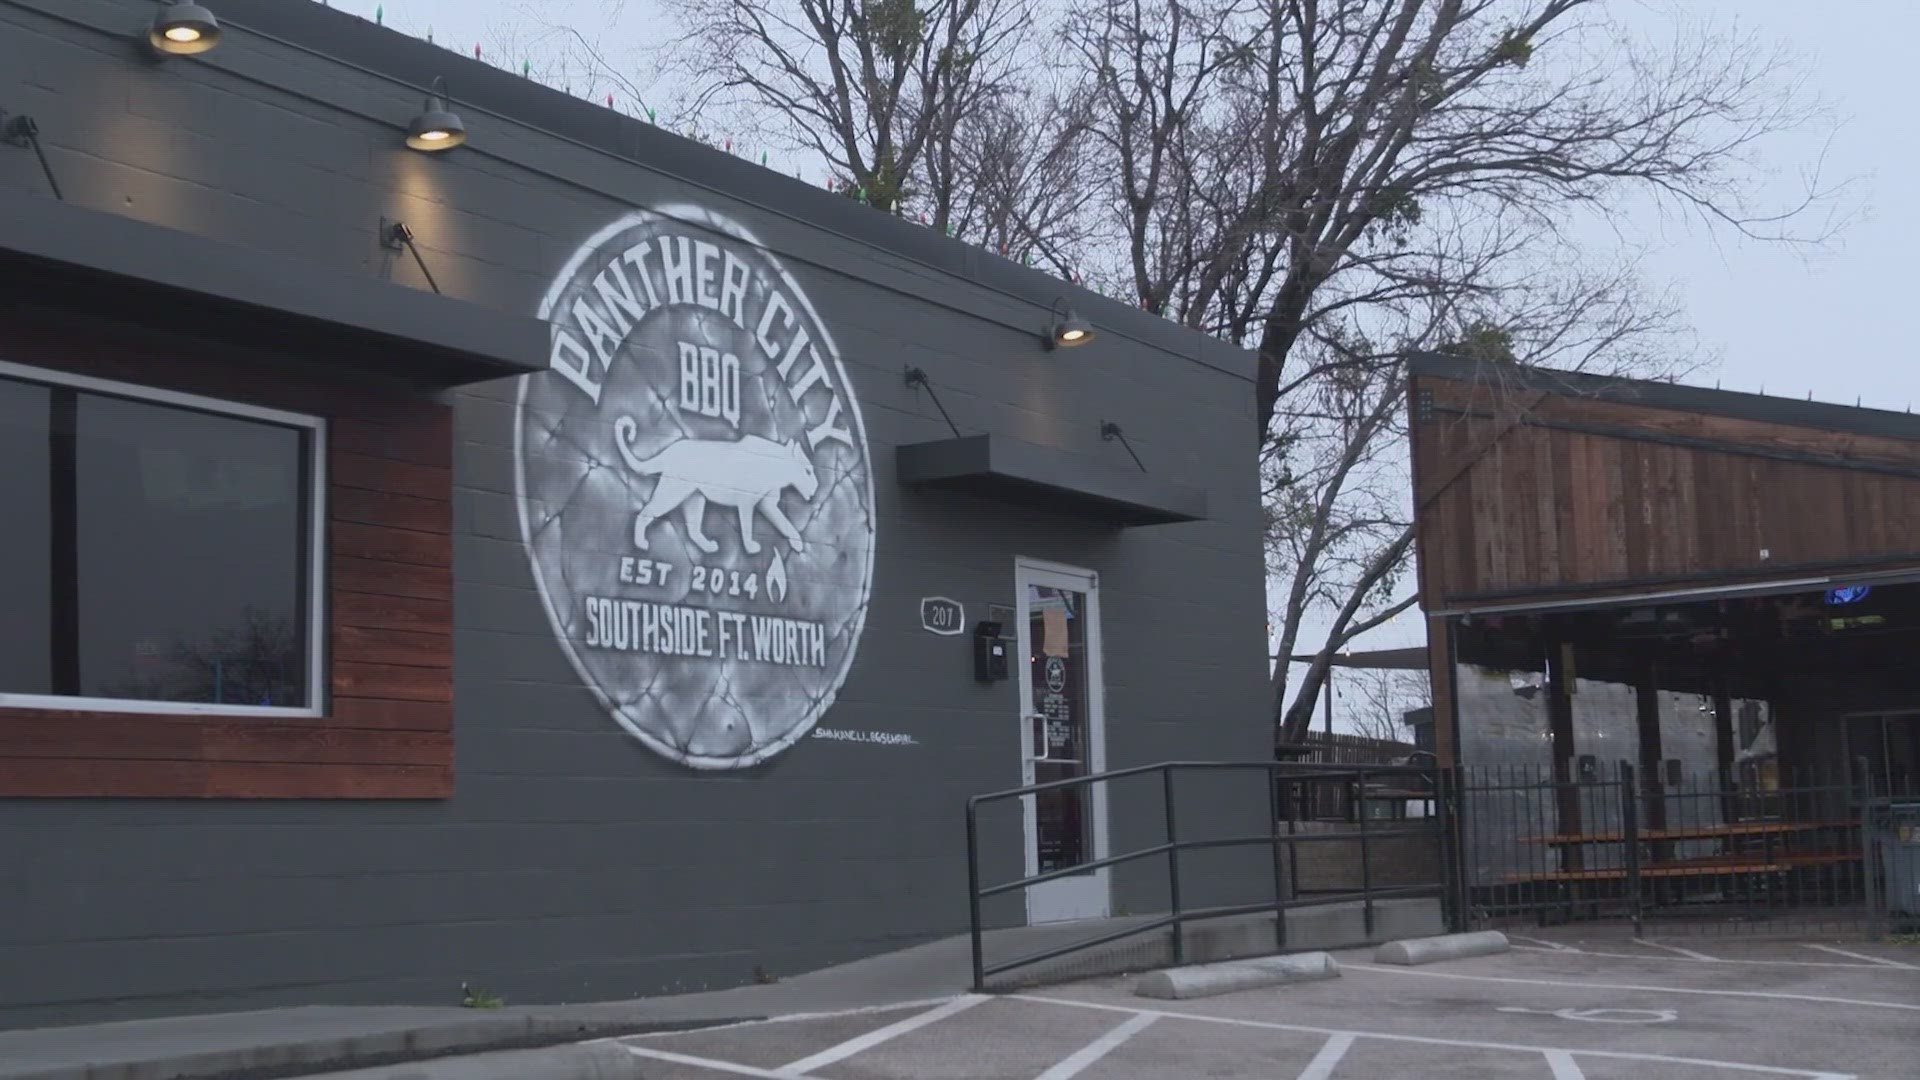 Panther City BBQ tracked a $30,000 pit trailer stolen from their restaurant to a cafe on the city's northwest side. The cafe owner denies involvement.